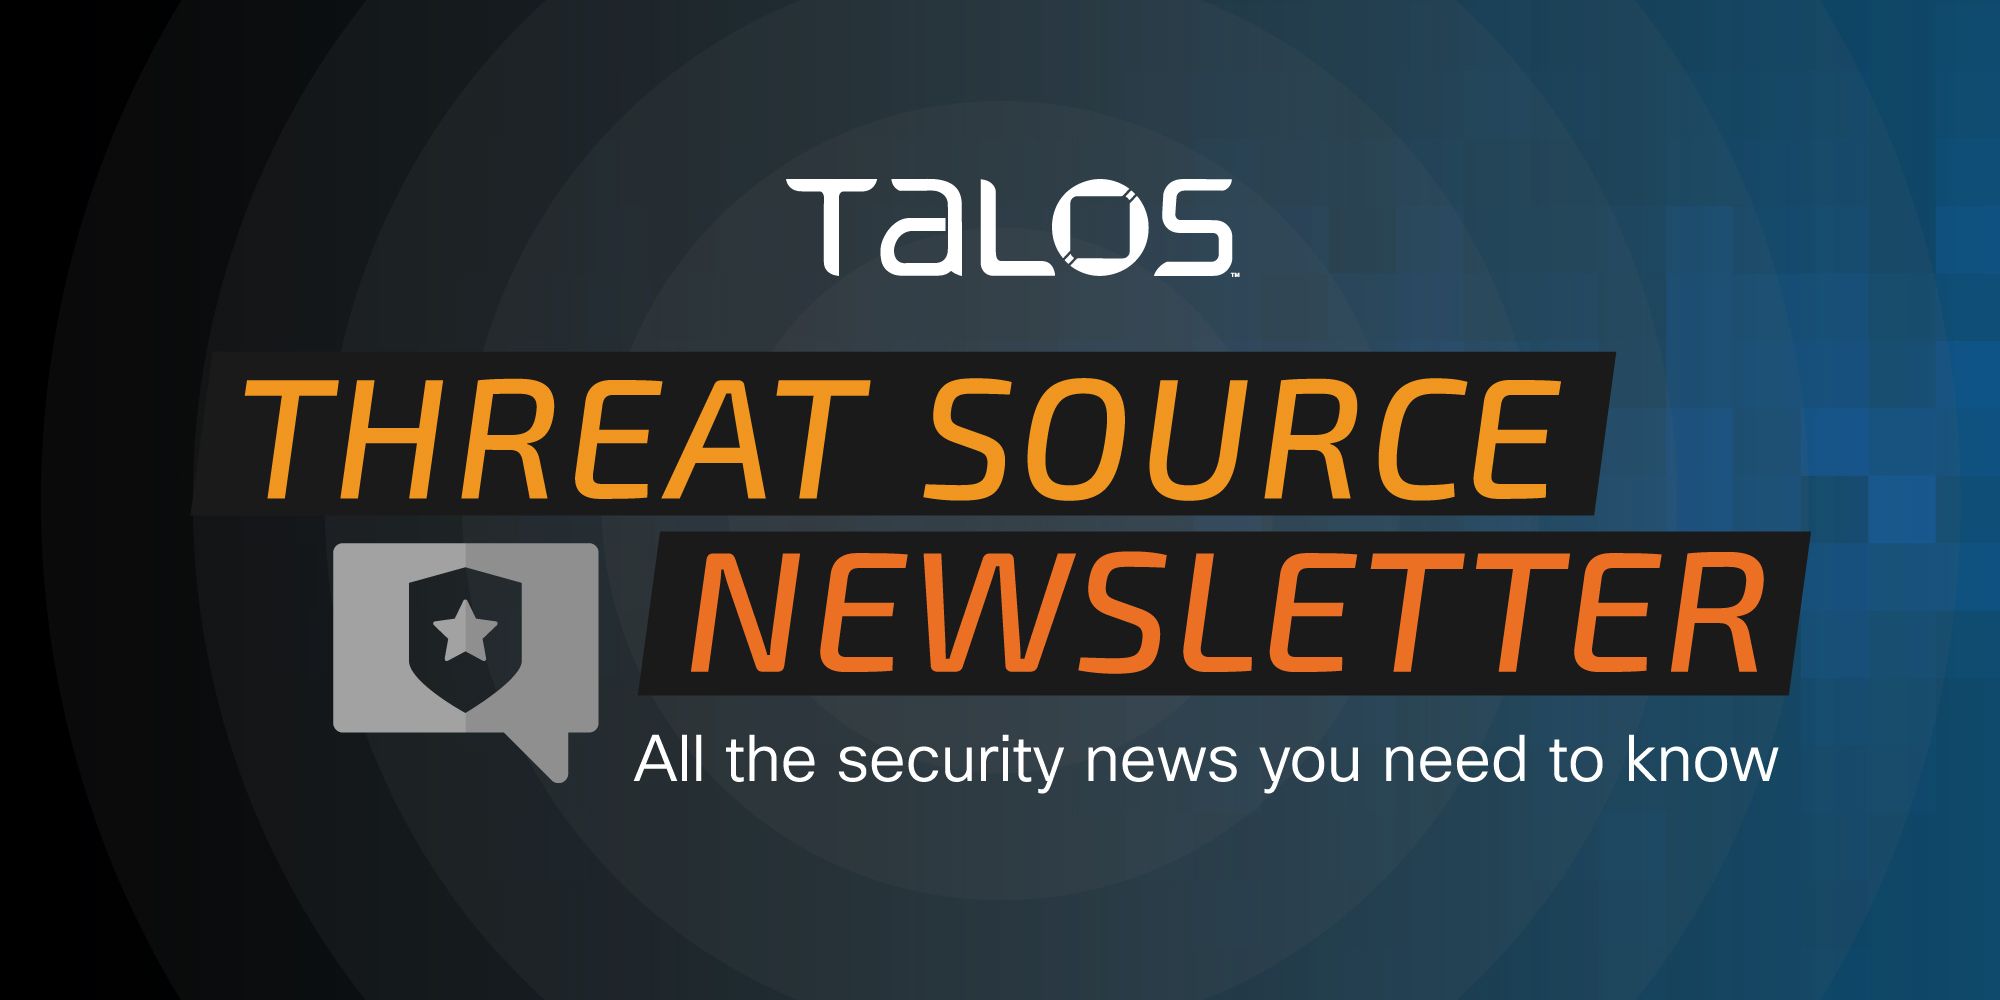 Threat Source newsletter Oct. 6, 2022 — Continuing down the Privacy Policy rabbit hole